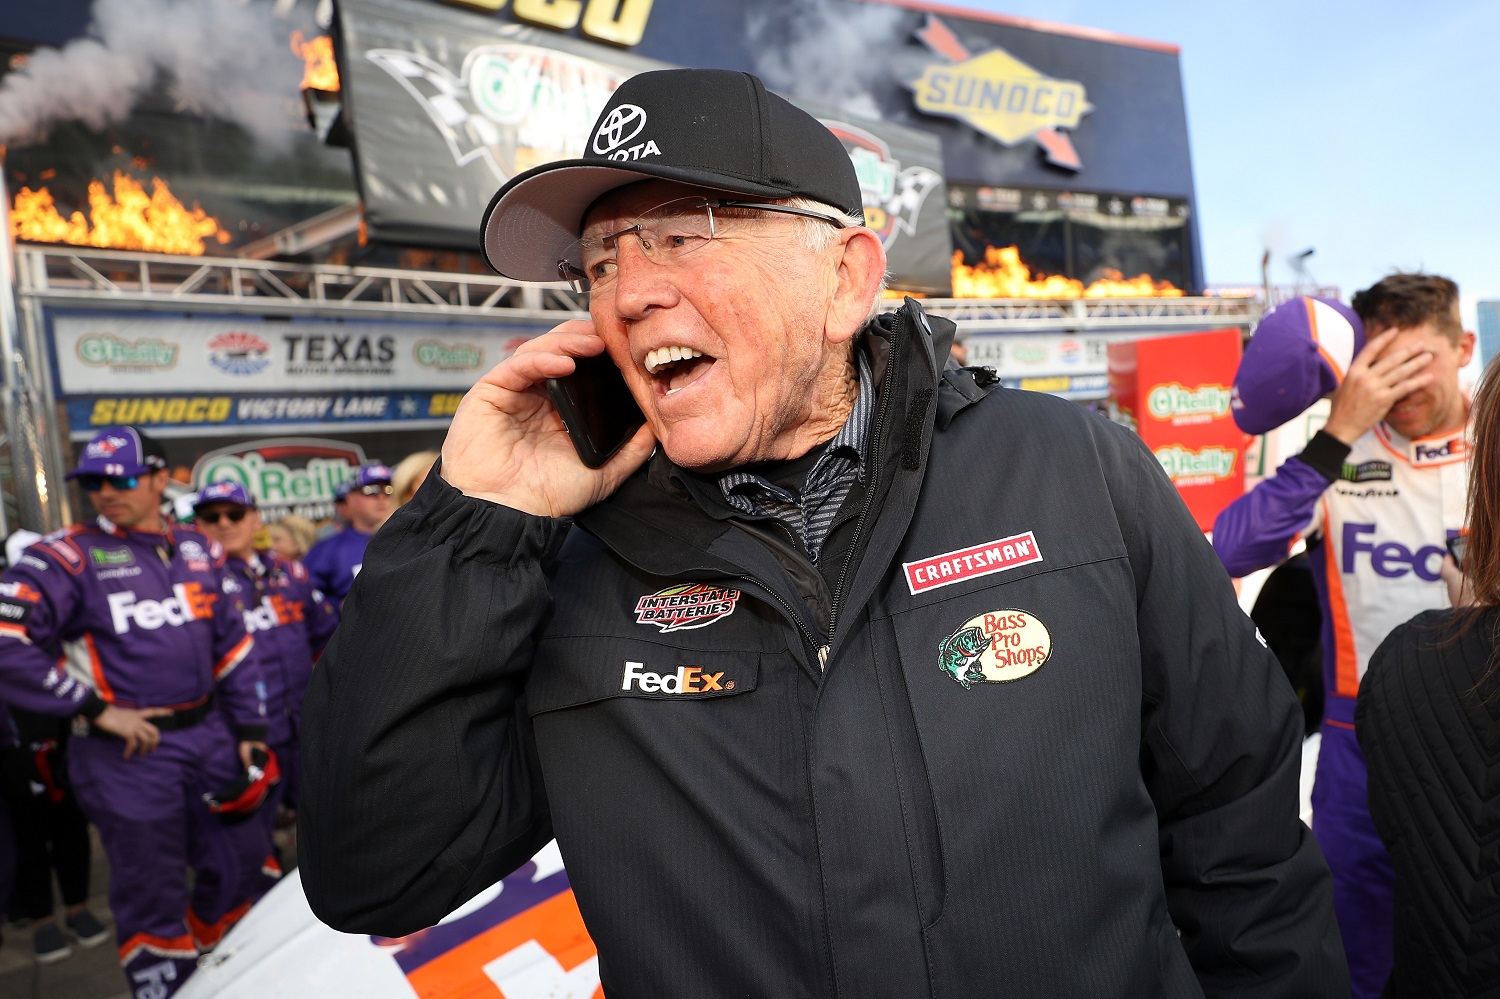 Team owner Joe Gibbs celebrates after Denny Hamlin's victory in the Monster Energy NASCAR Cup Series O'Reilly Auto Parts 500 at Texas Motor Speedway on March 31, 2019.